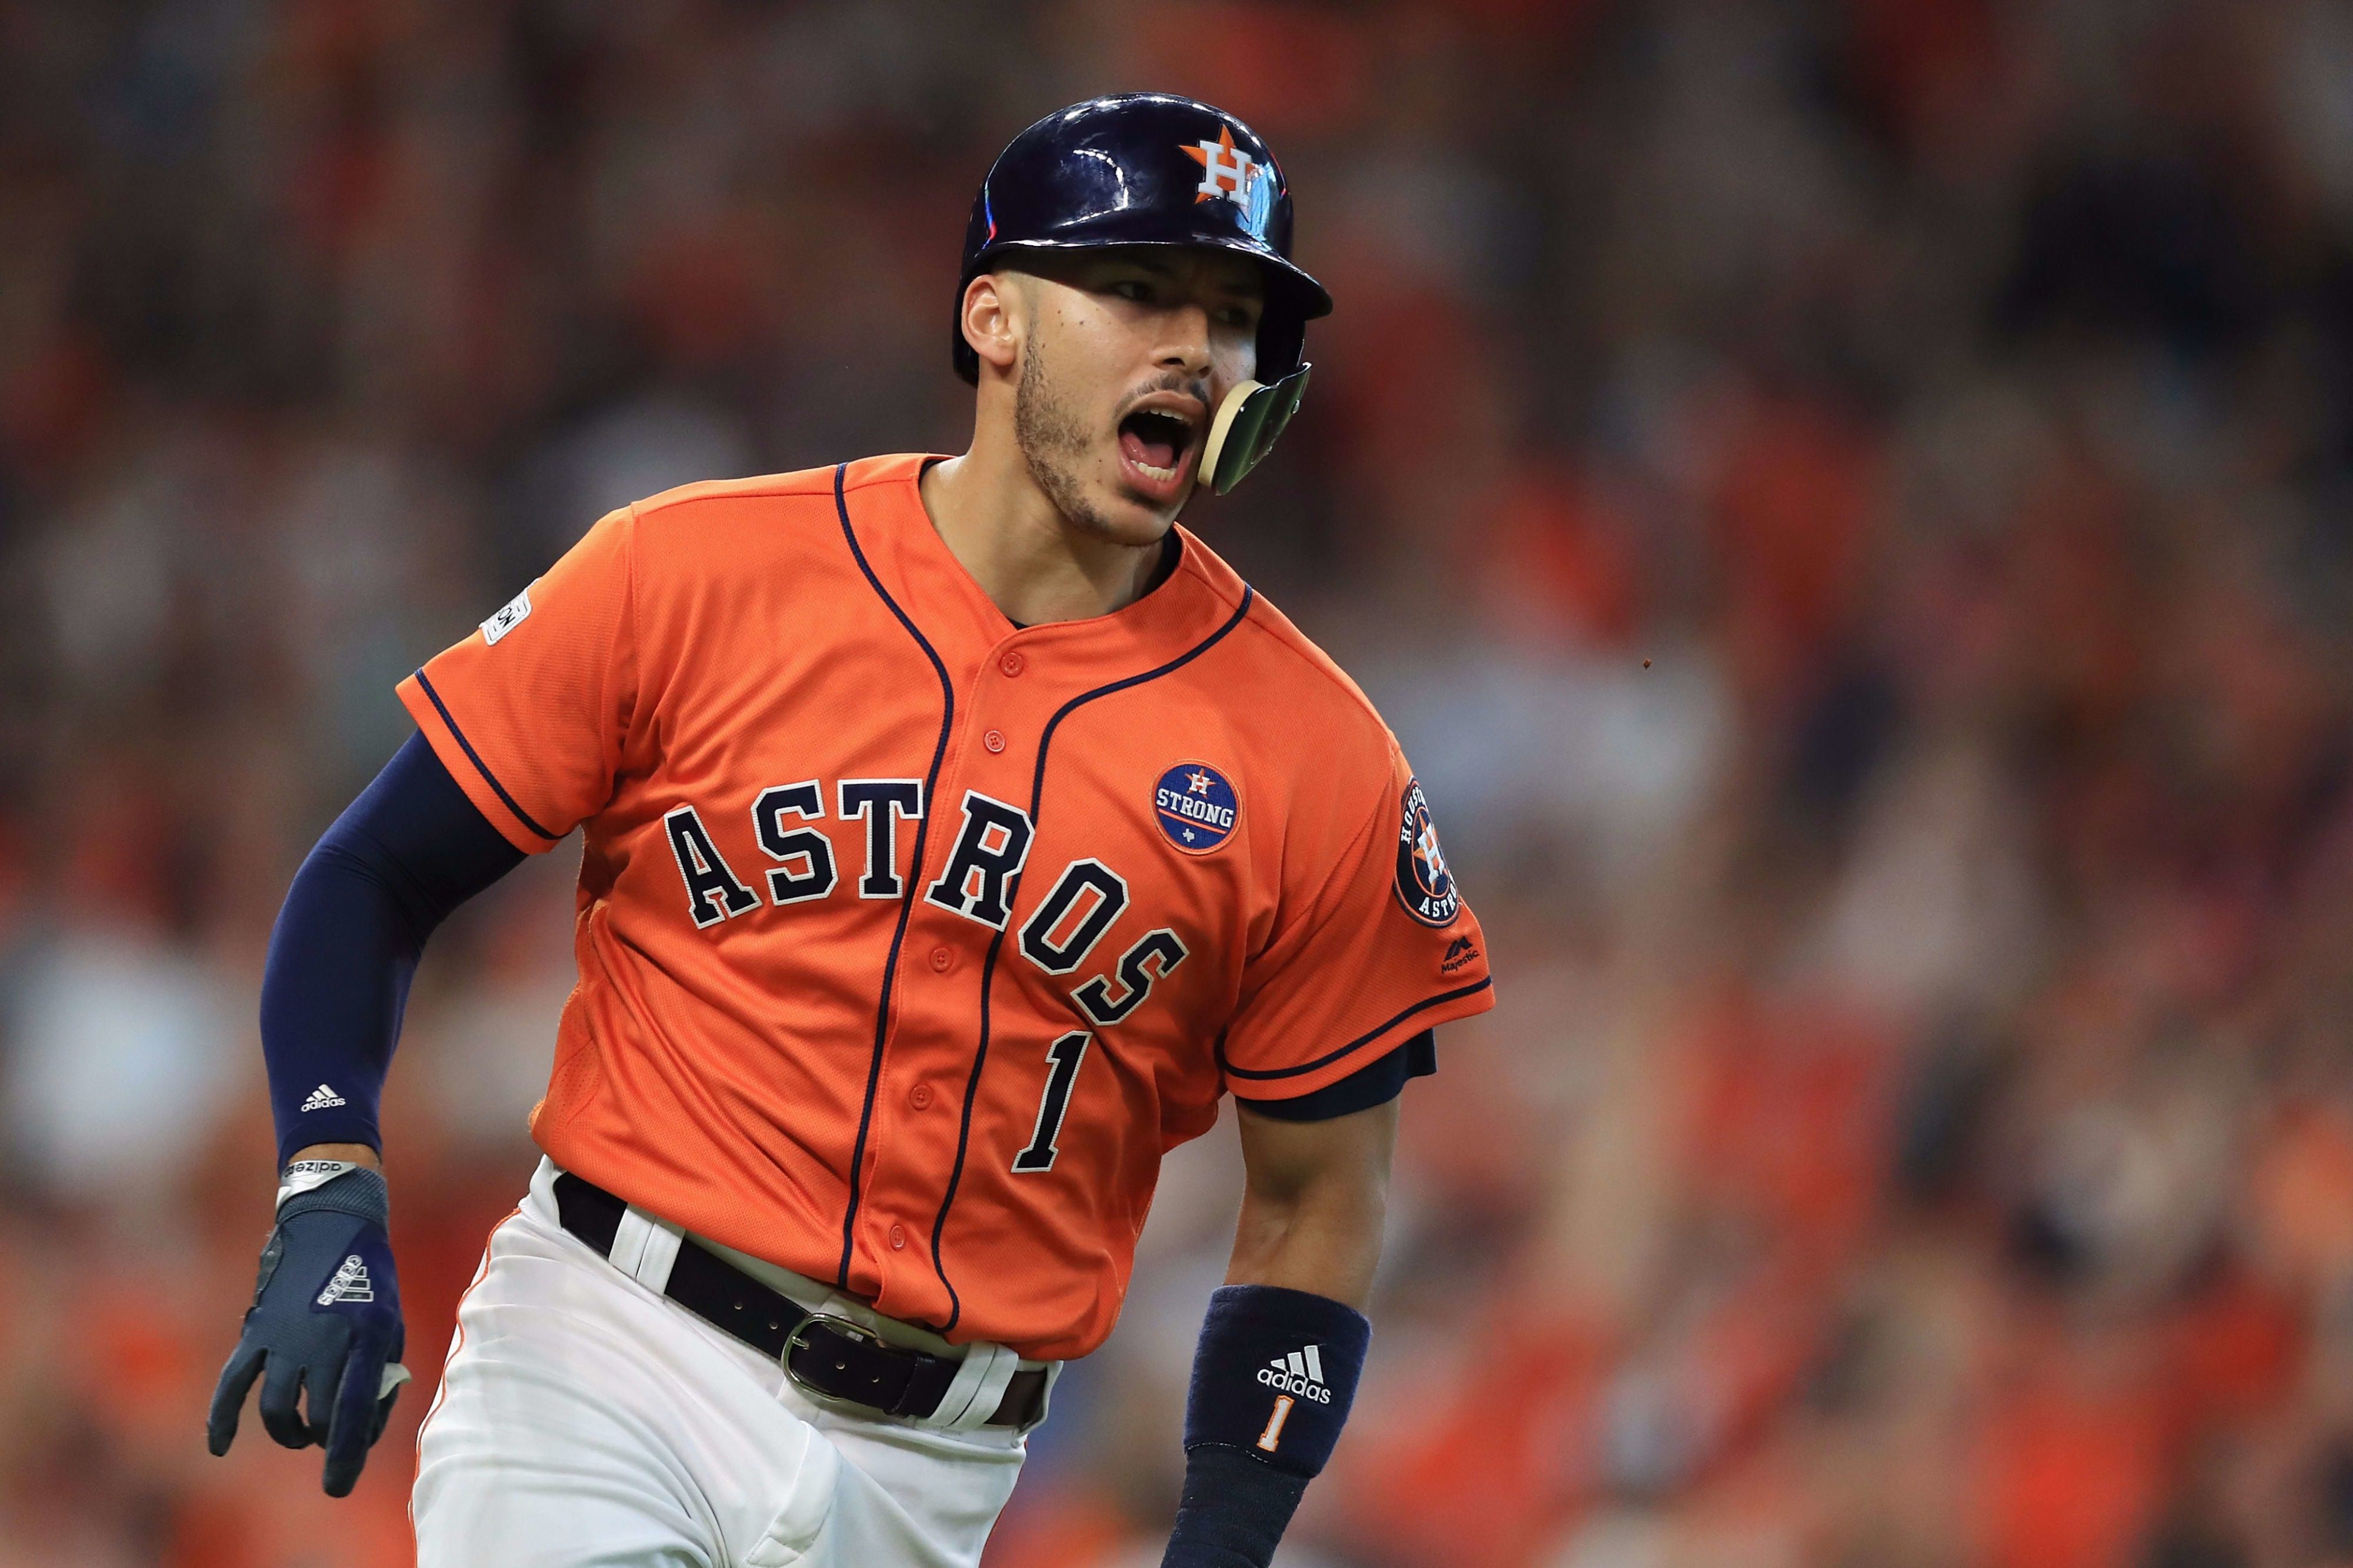 Astros third baseman Carlos Correa celebrates after a big home run in game two of the ALCS